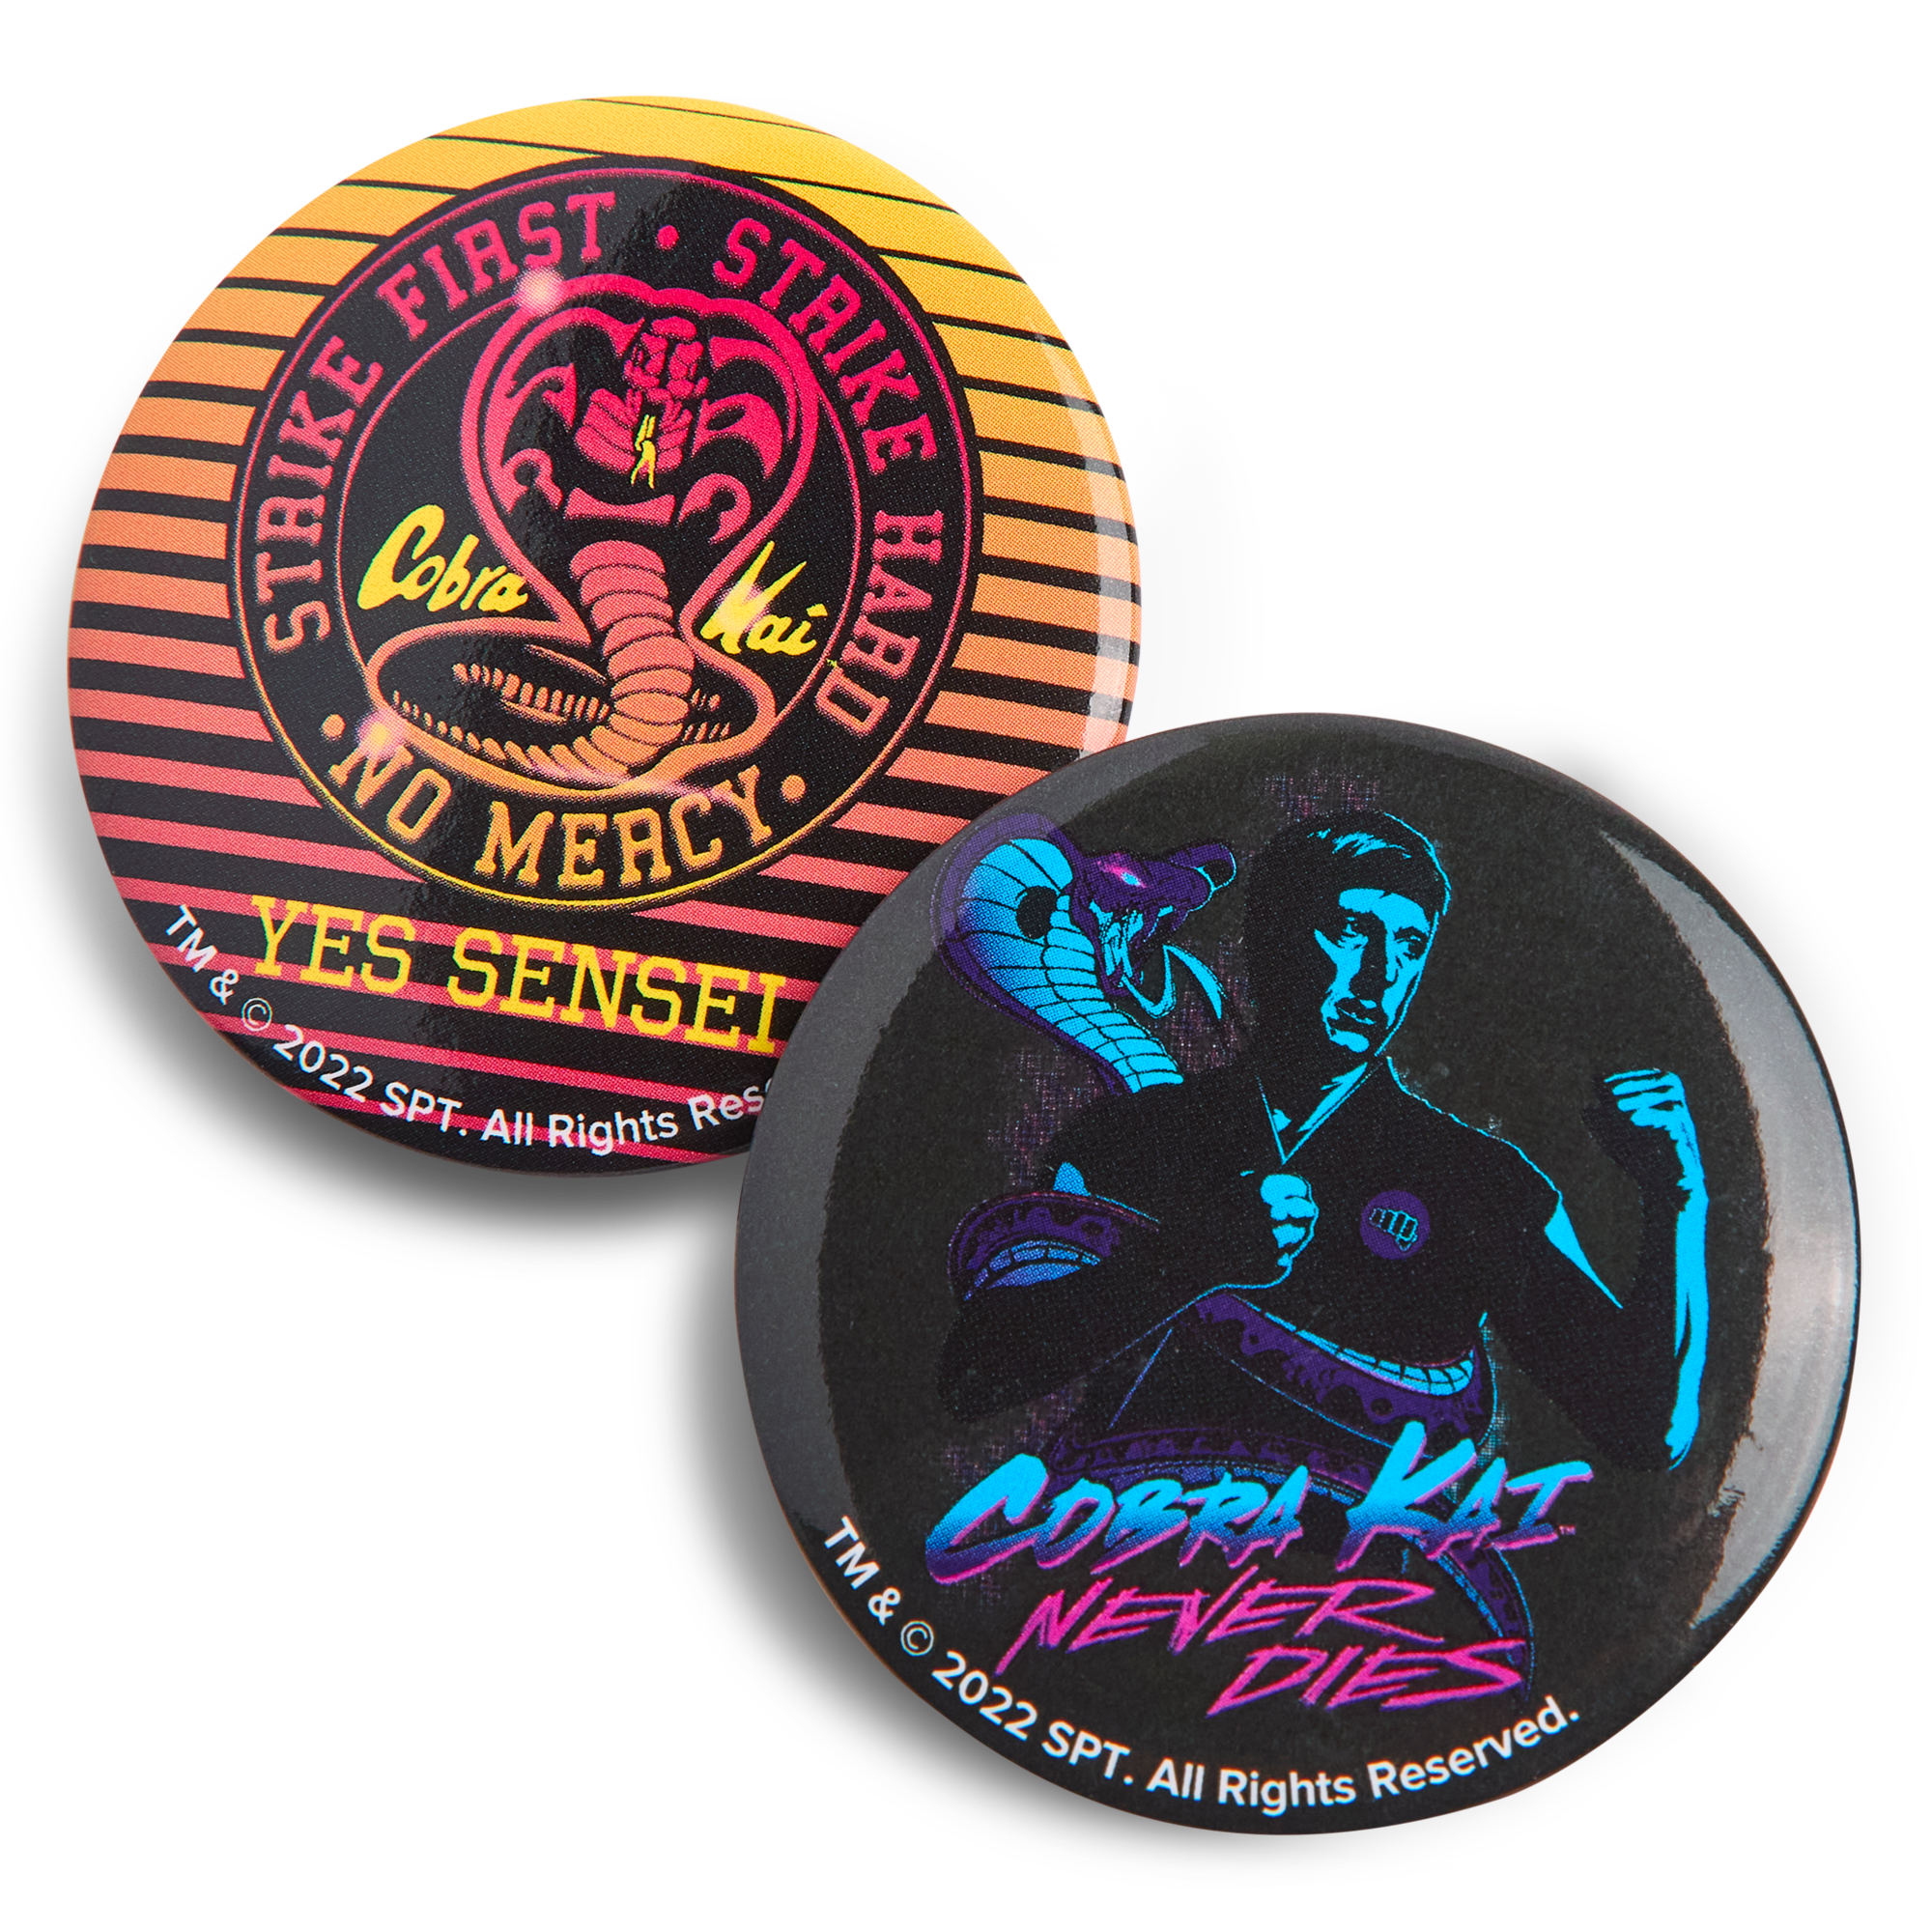 Cobra Kai Limited Edition Crate Series